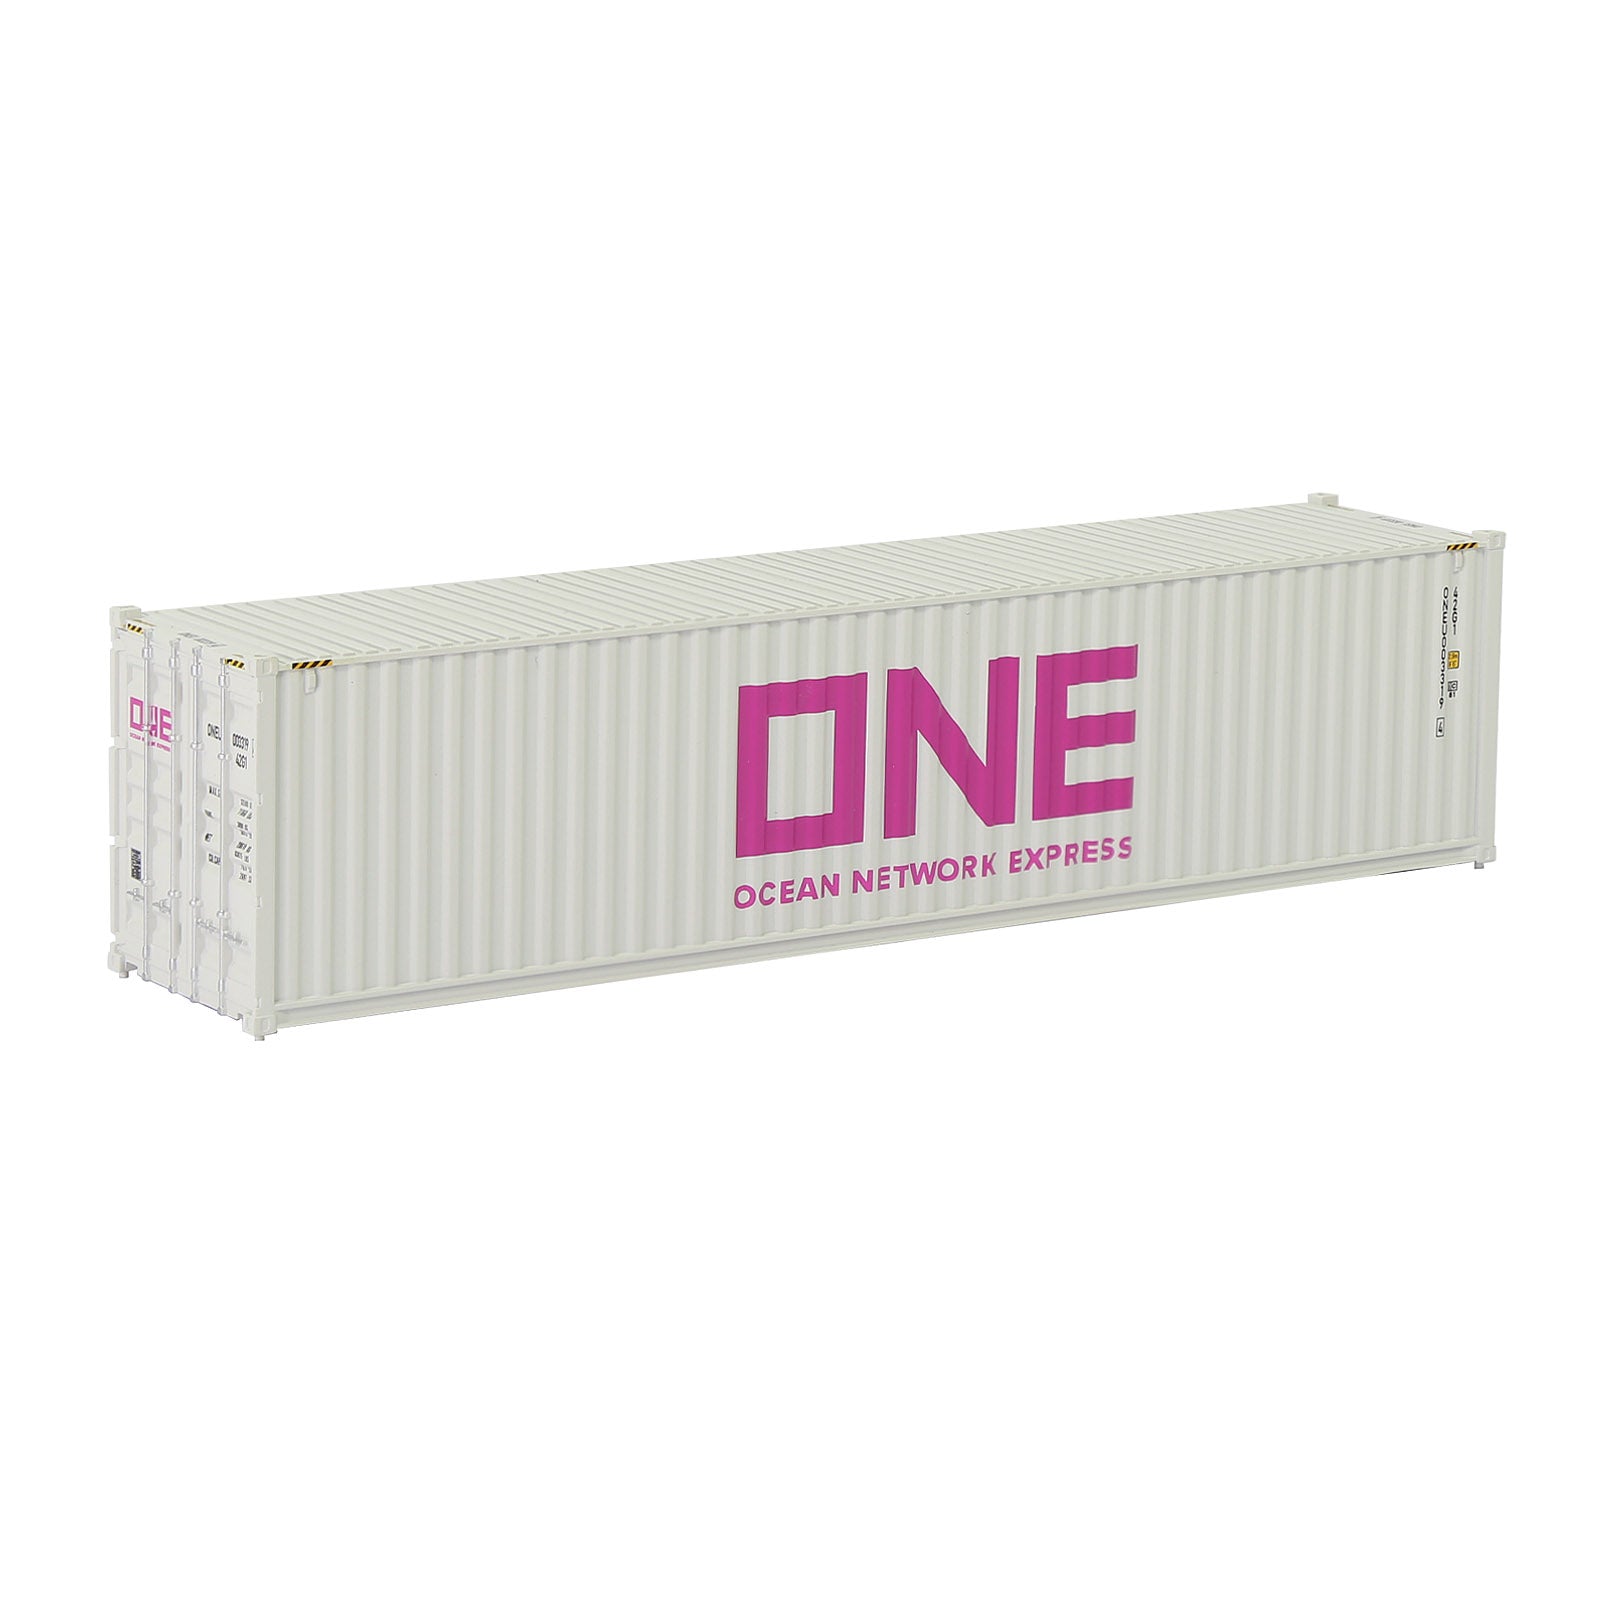 C8746 1pc HO Scale 1:87 40ft Model Container